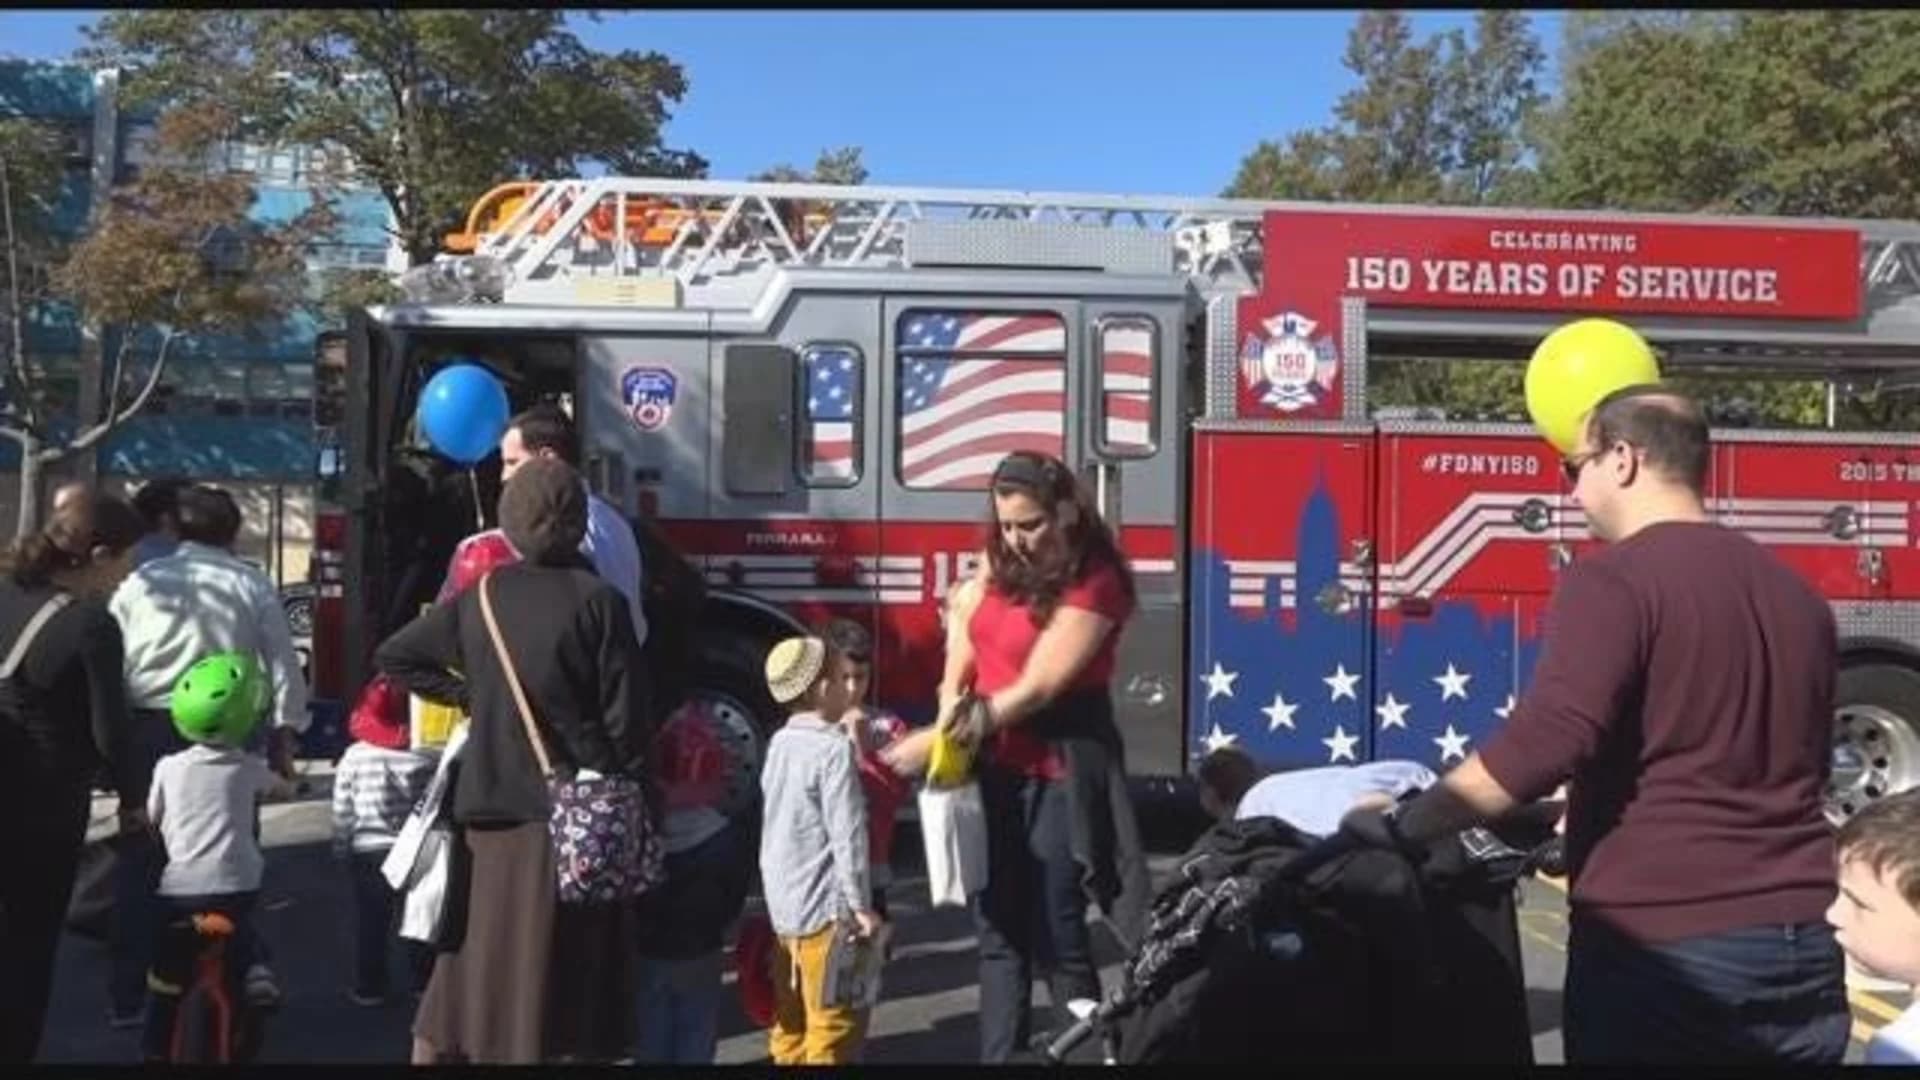 Annual Safety Awareness Day at Riverdale Jewish center